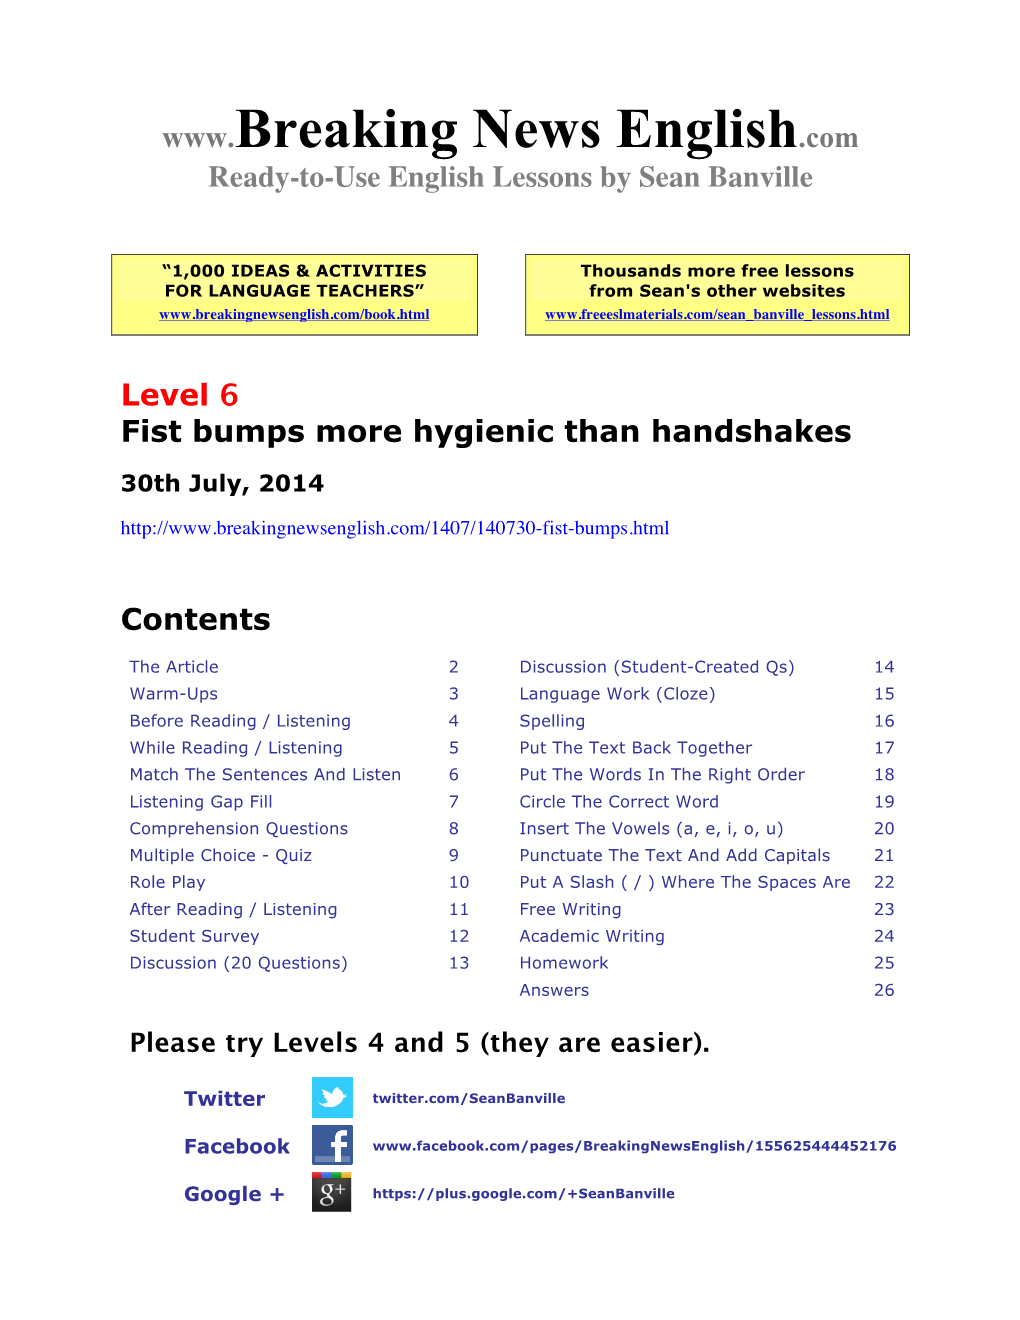 Download the 26-Page Lesson